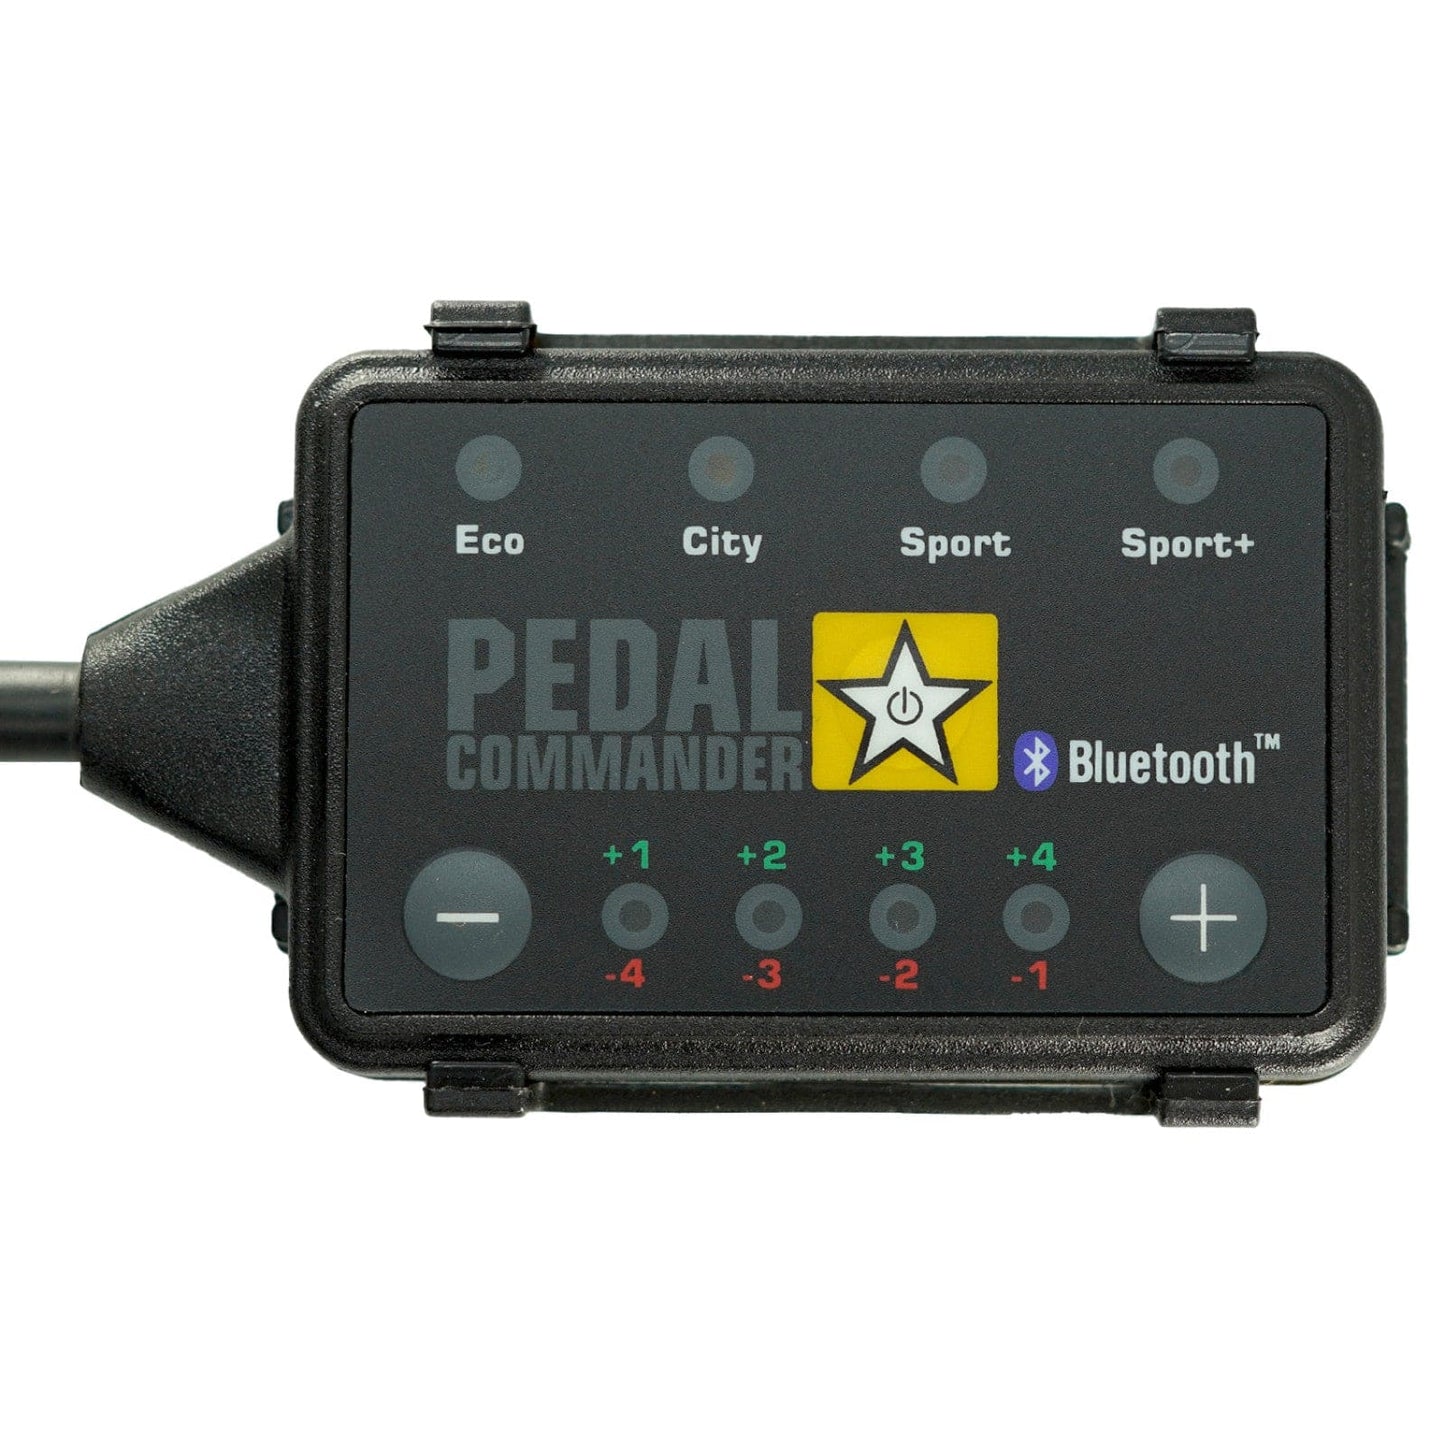 Pedal Commander 51-NFT-Q60-01 Pedal Commander Throttle Response Controller with Bluetooth Support - Rico's Garage